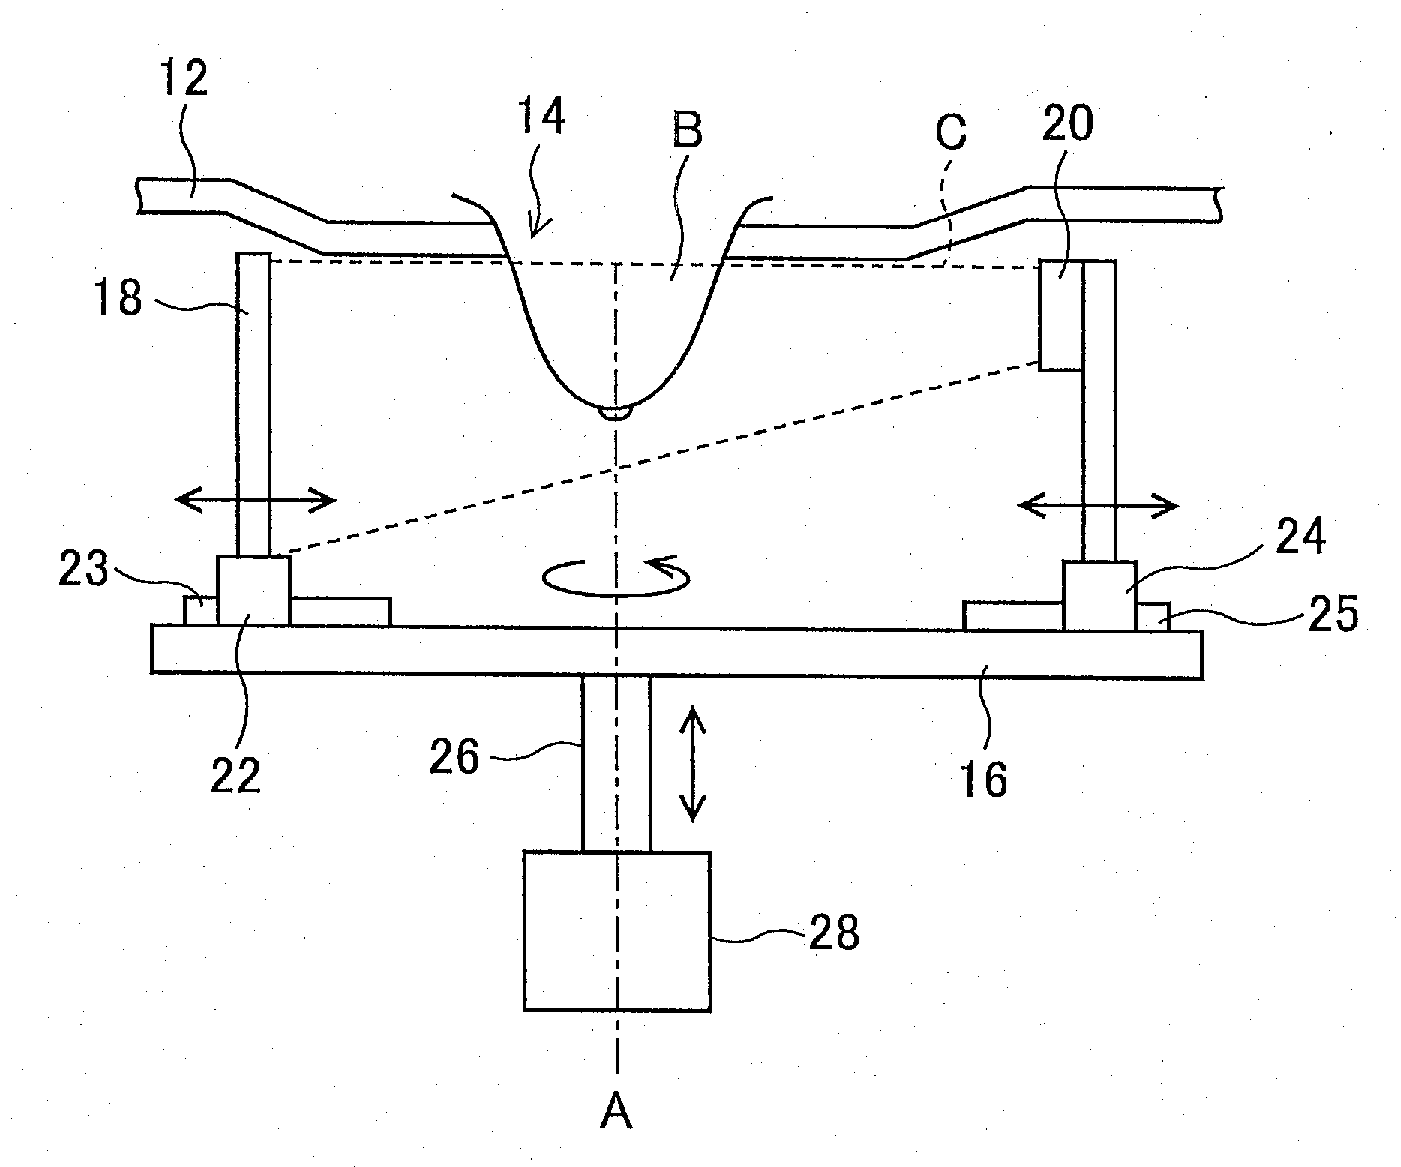 Radiation imaging apparatus and method for breast